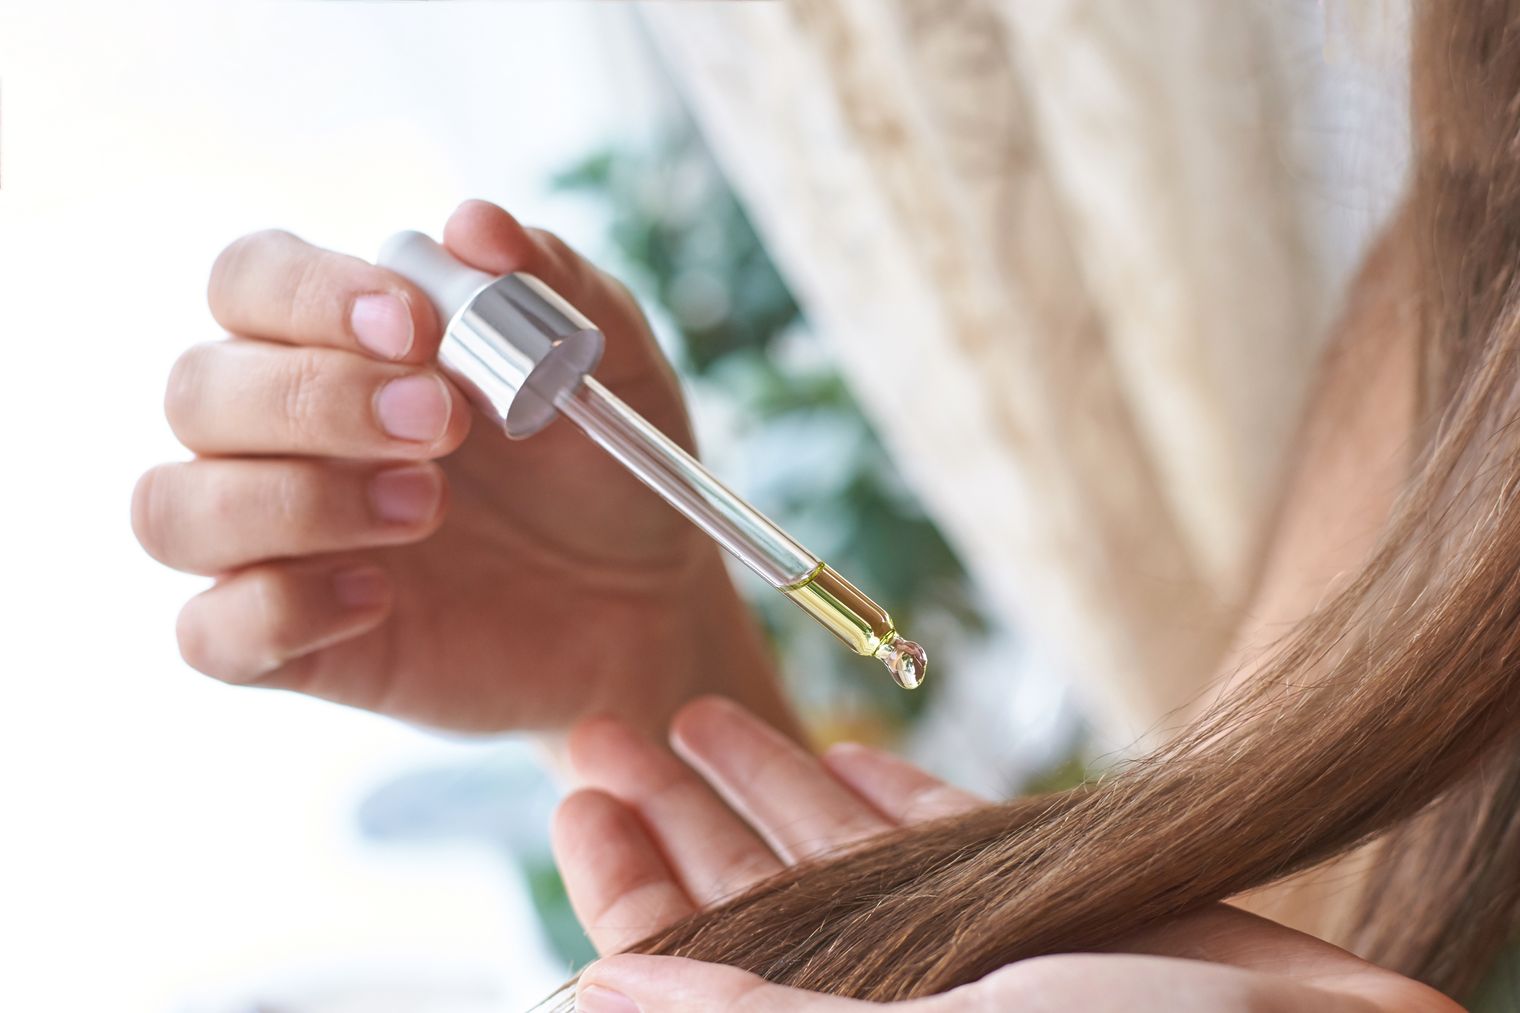 Hair Oiling: Should you be using Olive Oil in your hair?